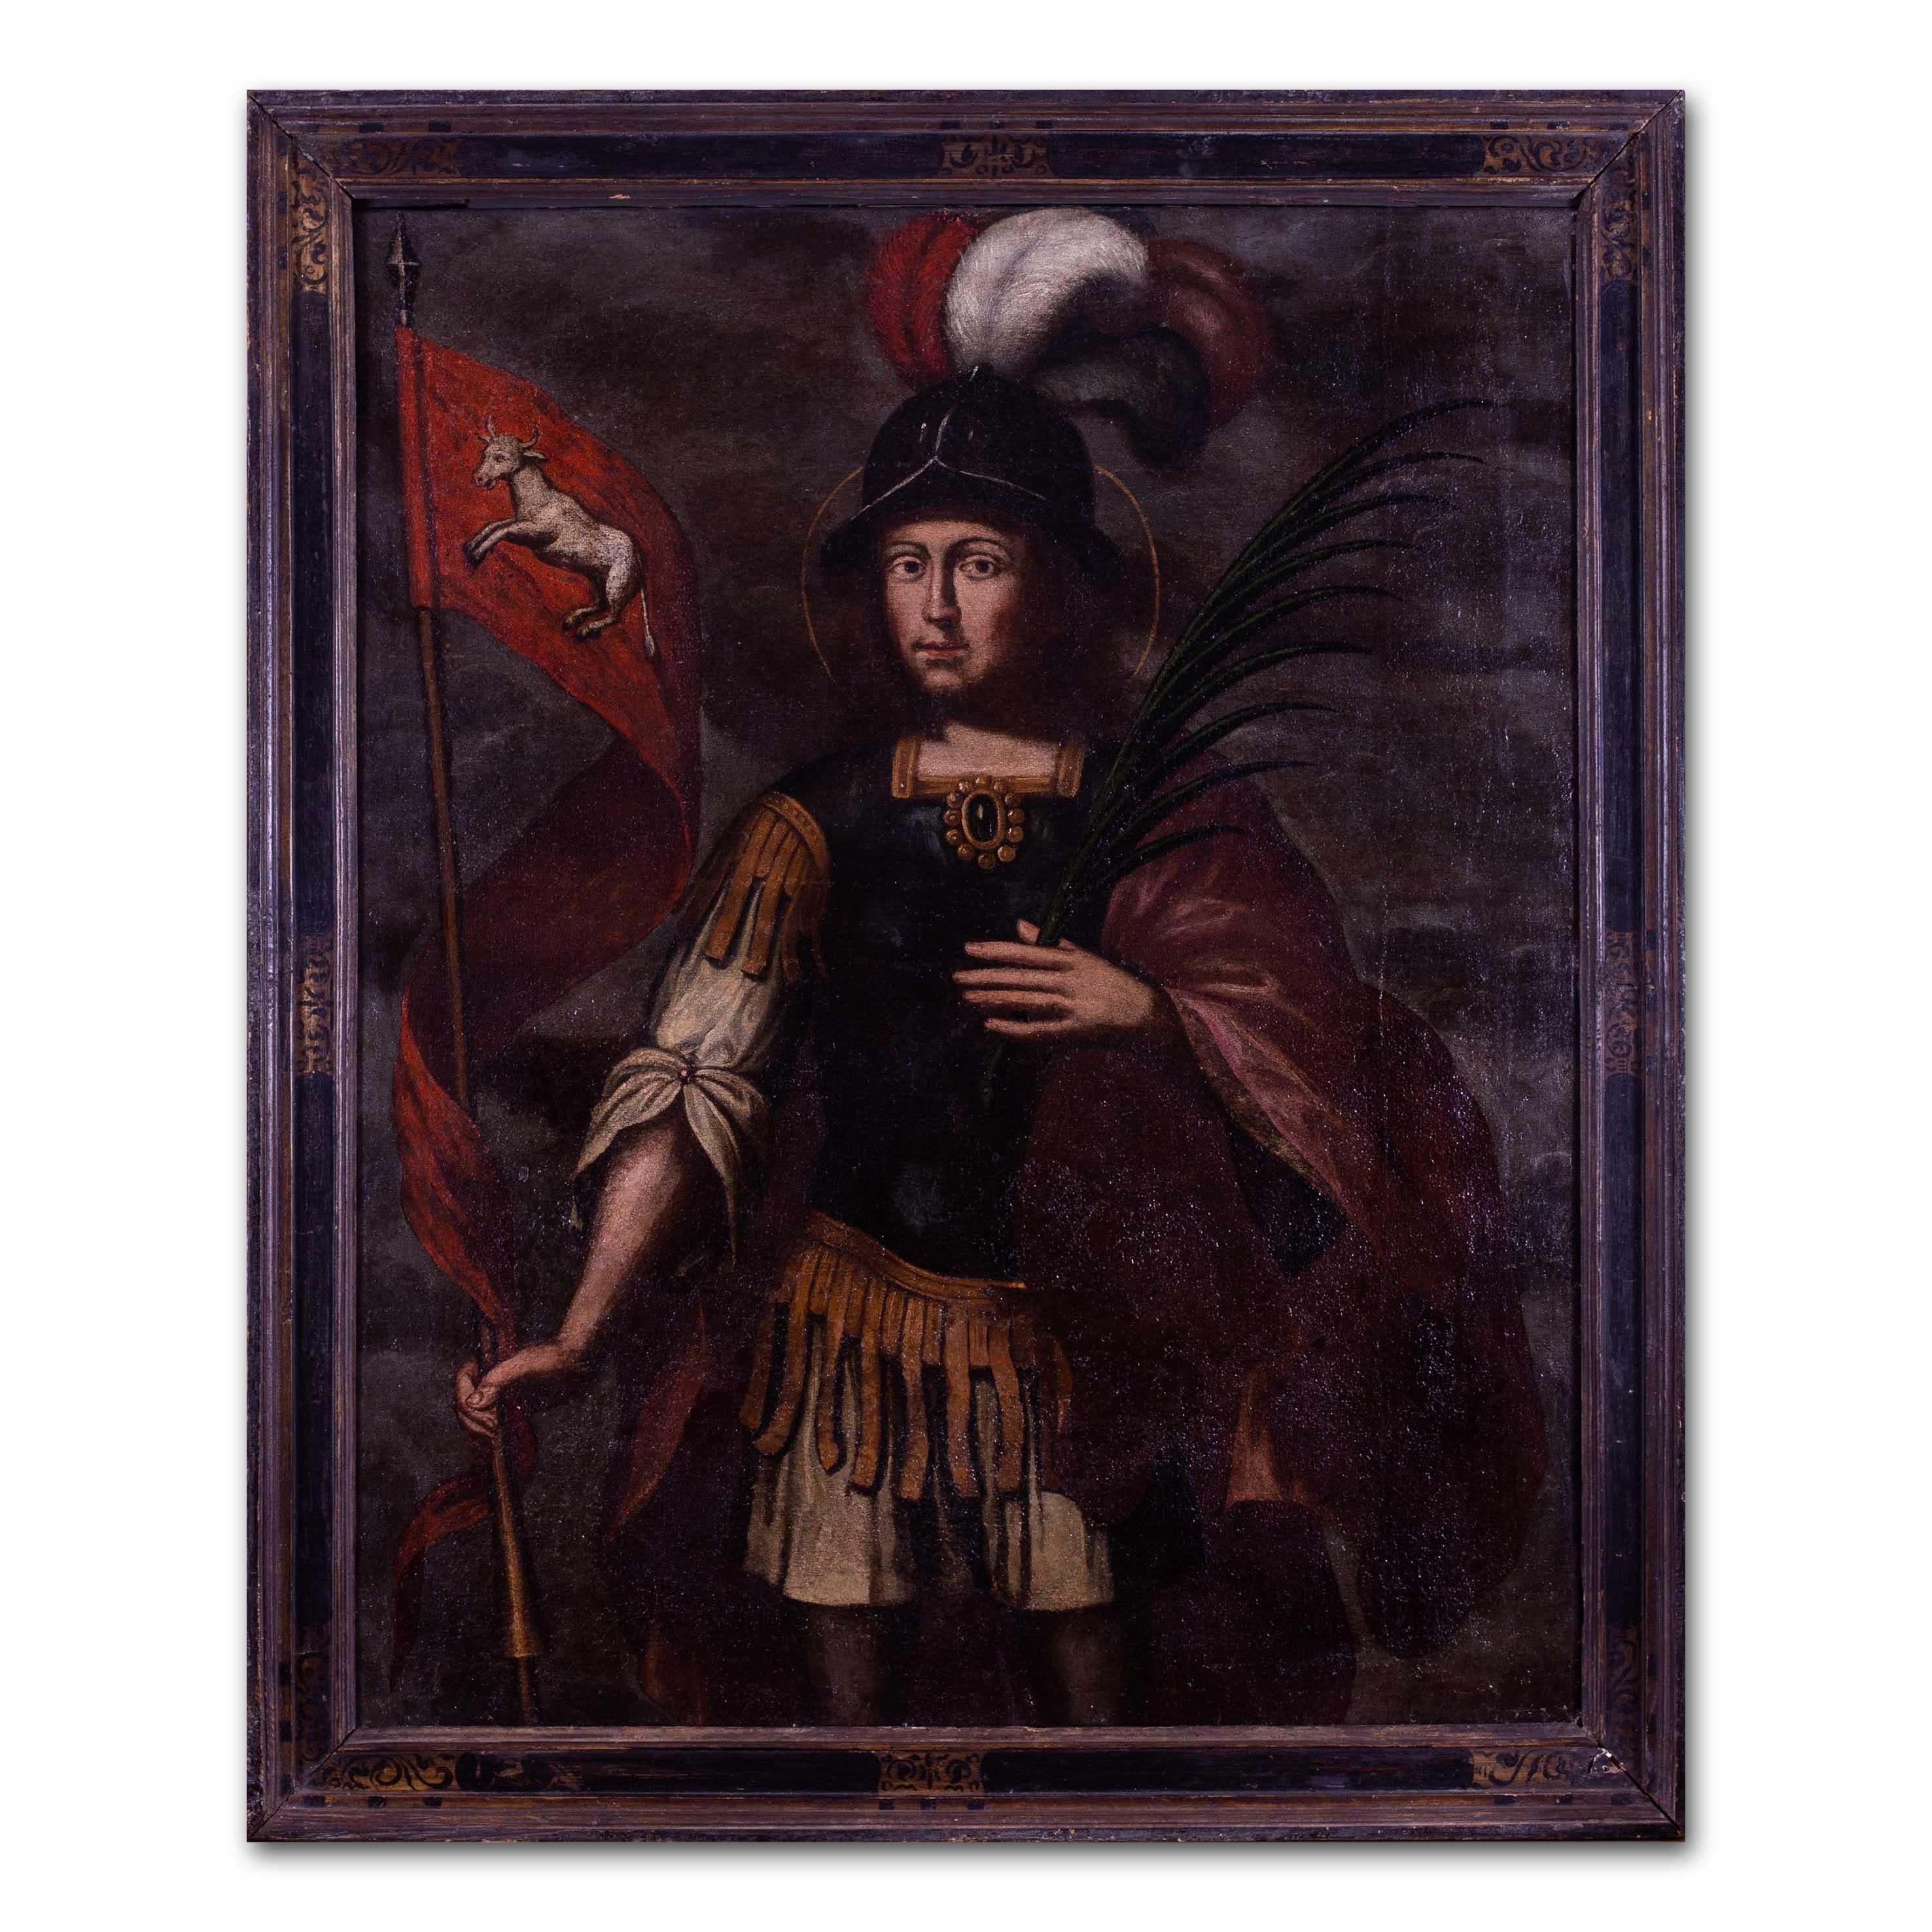 16th Century Spanish portrait of Saint Fermin of Pamplona - Black Portrait Painting by Unknown